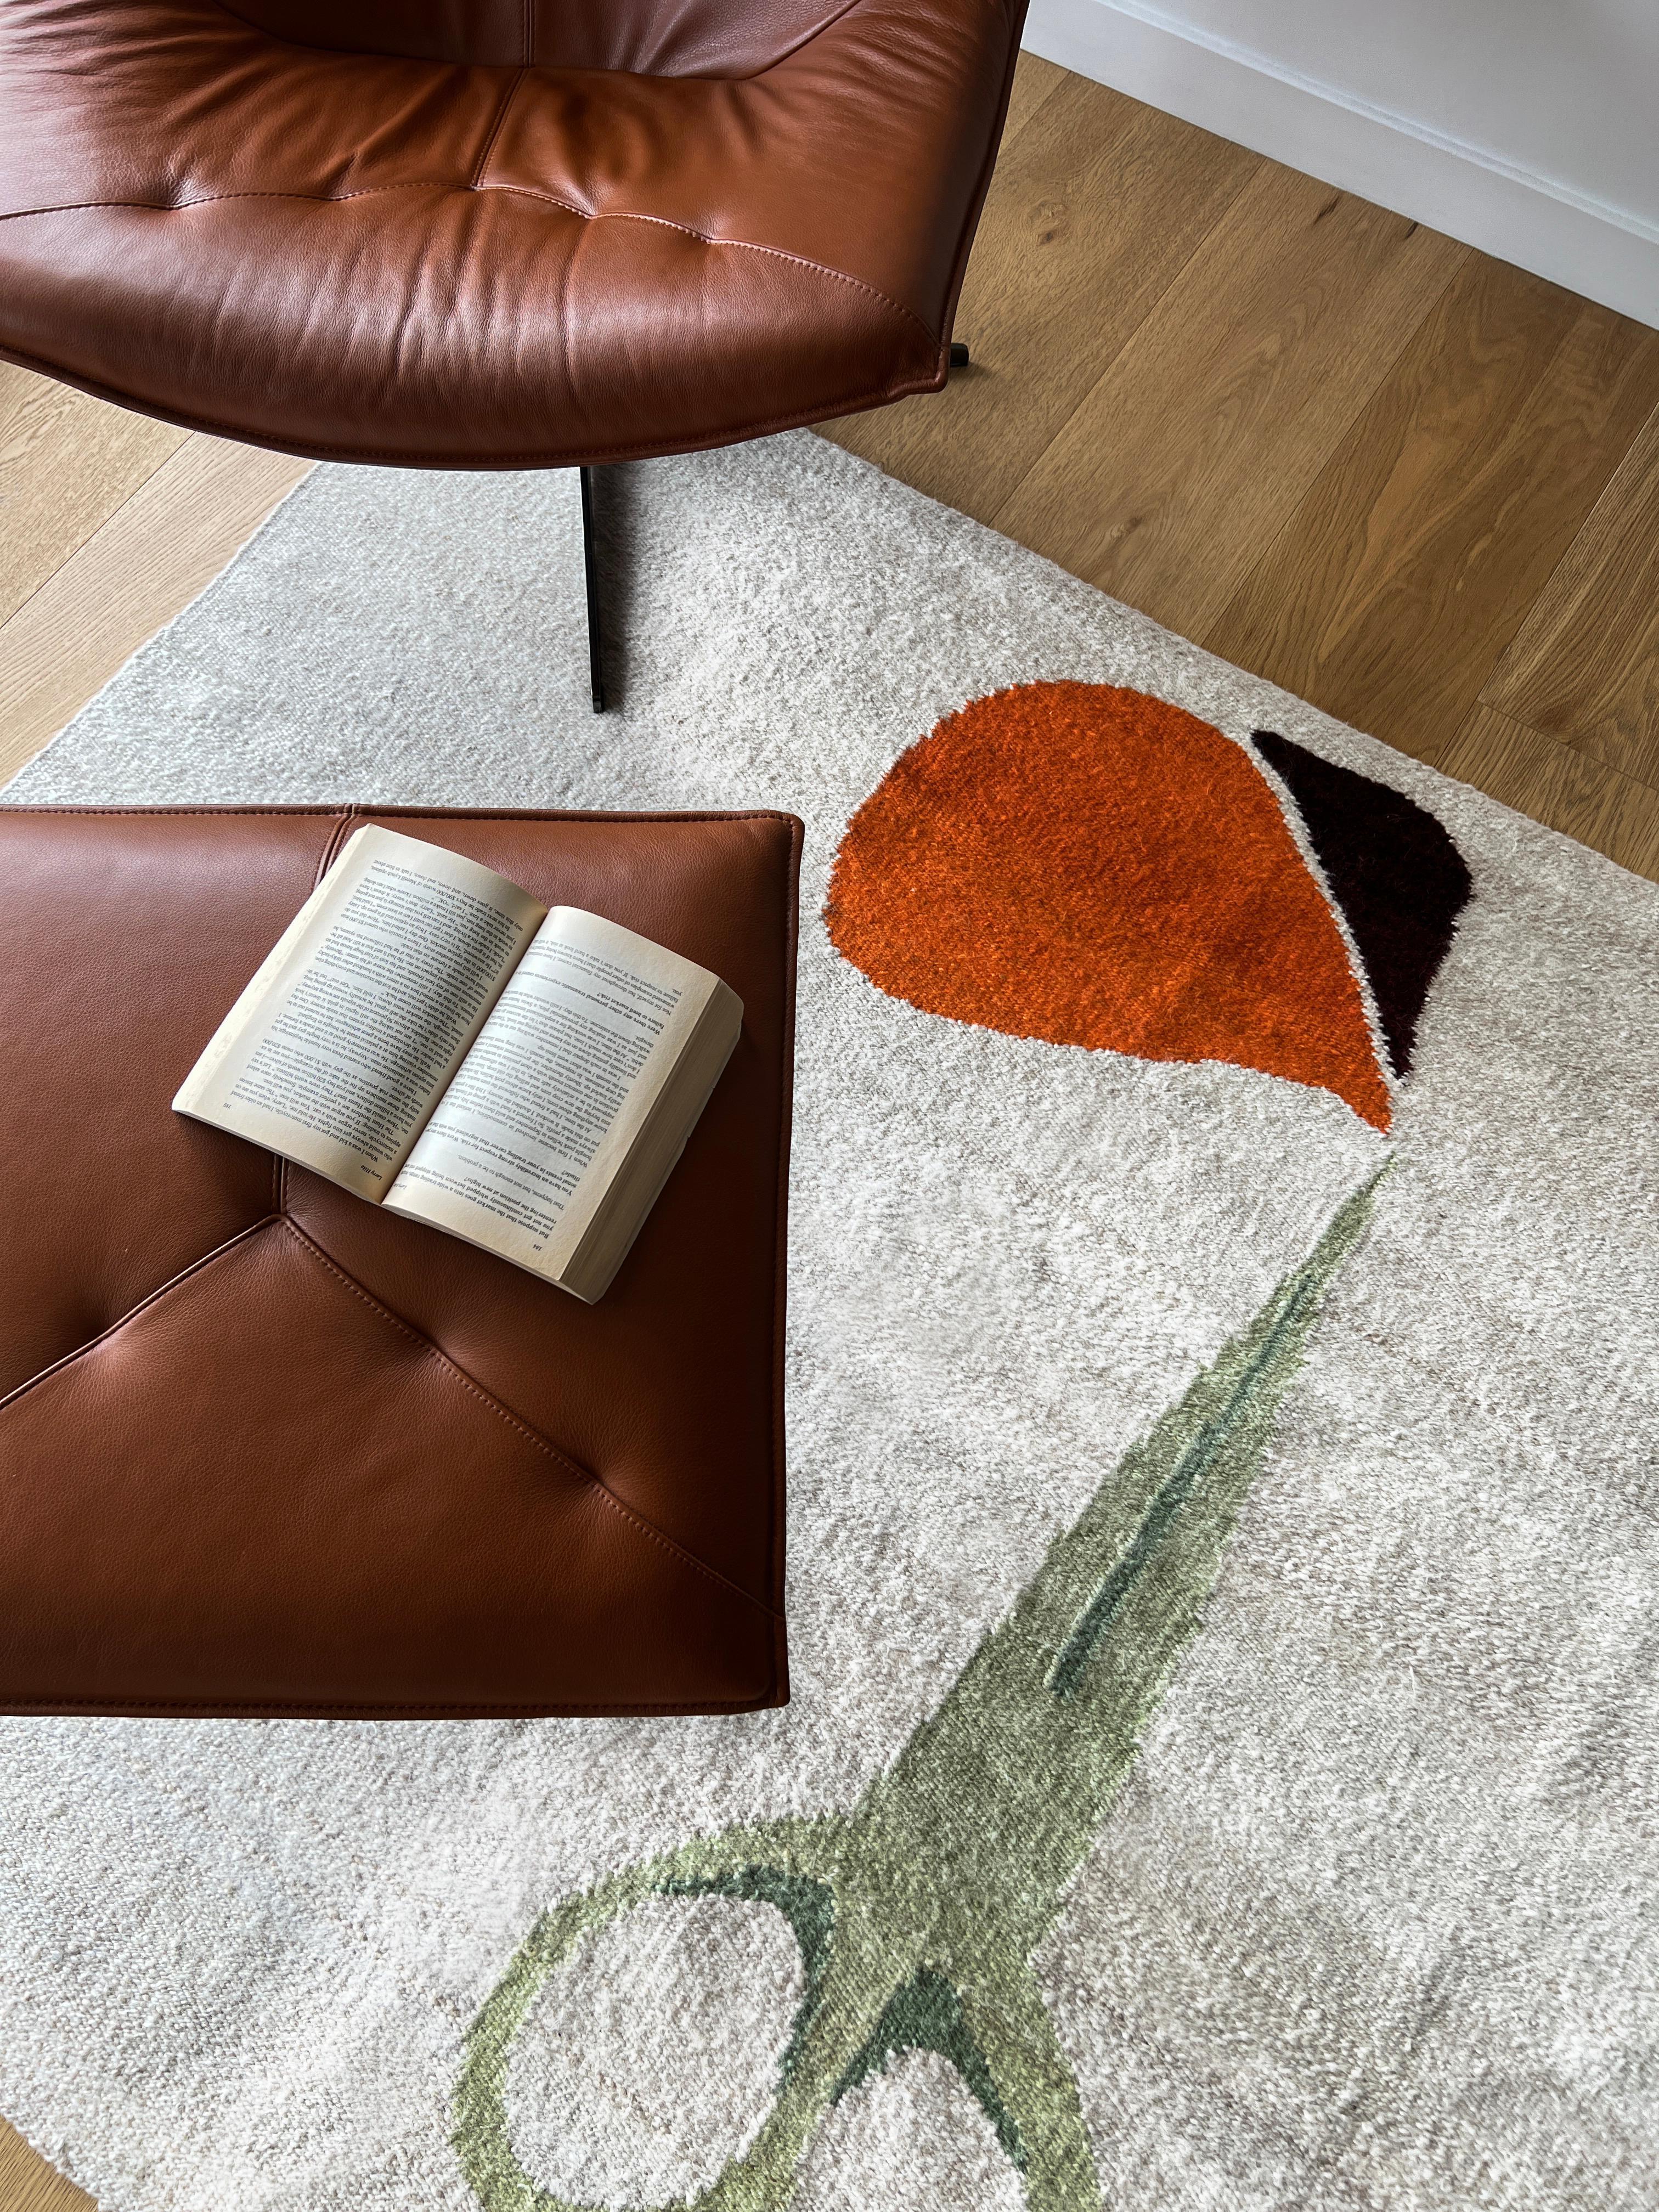 
Adapted from the original design by Natalia Geci, Bloody Scissors, 2020. 

LALANA RUGS is an applied arts initiative born from the desire to combine proposals by contemporary artists with traditional local techniques and noble materials. The three